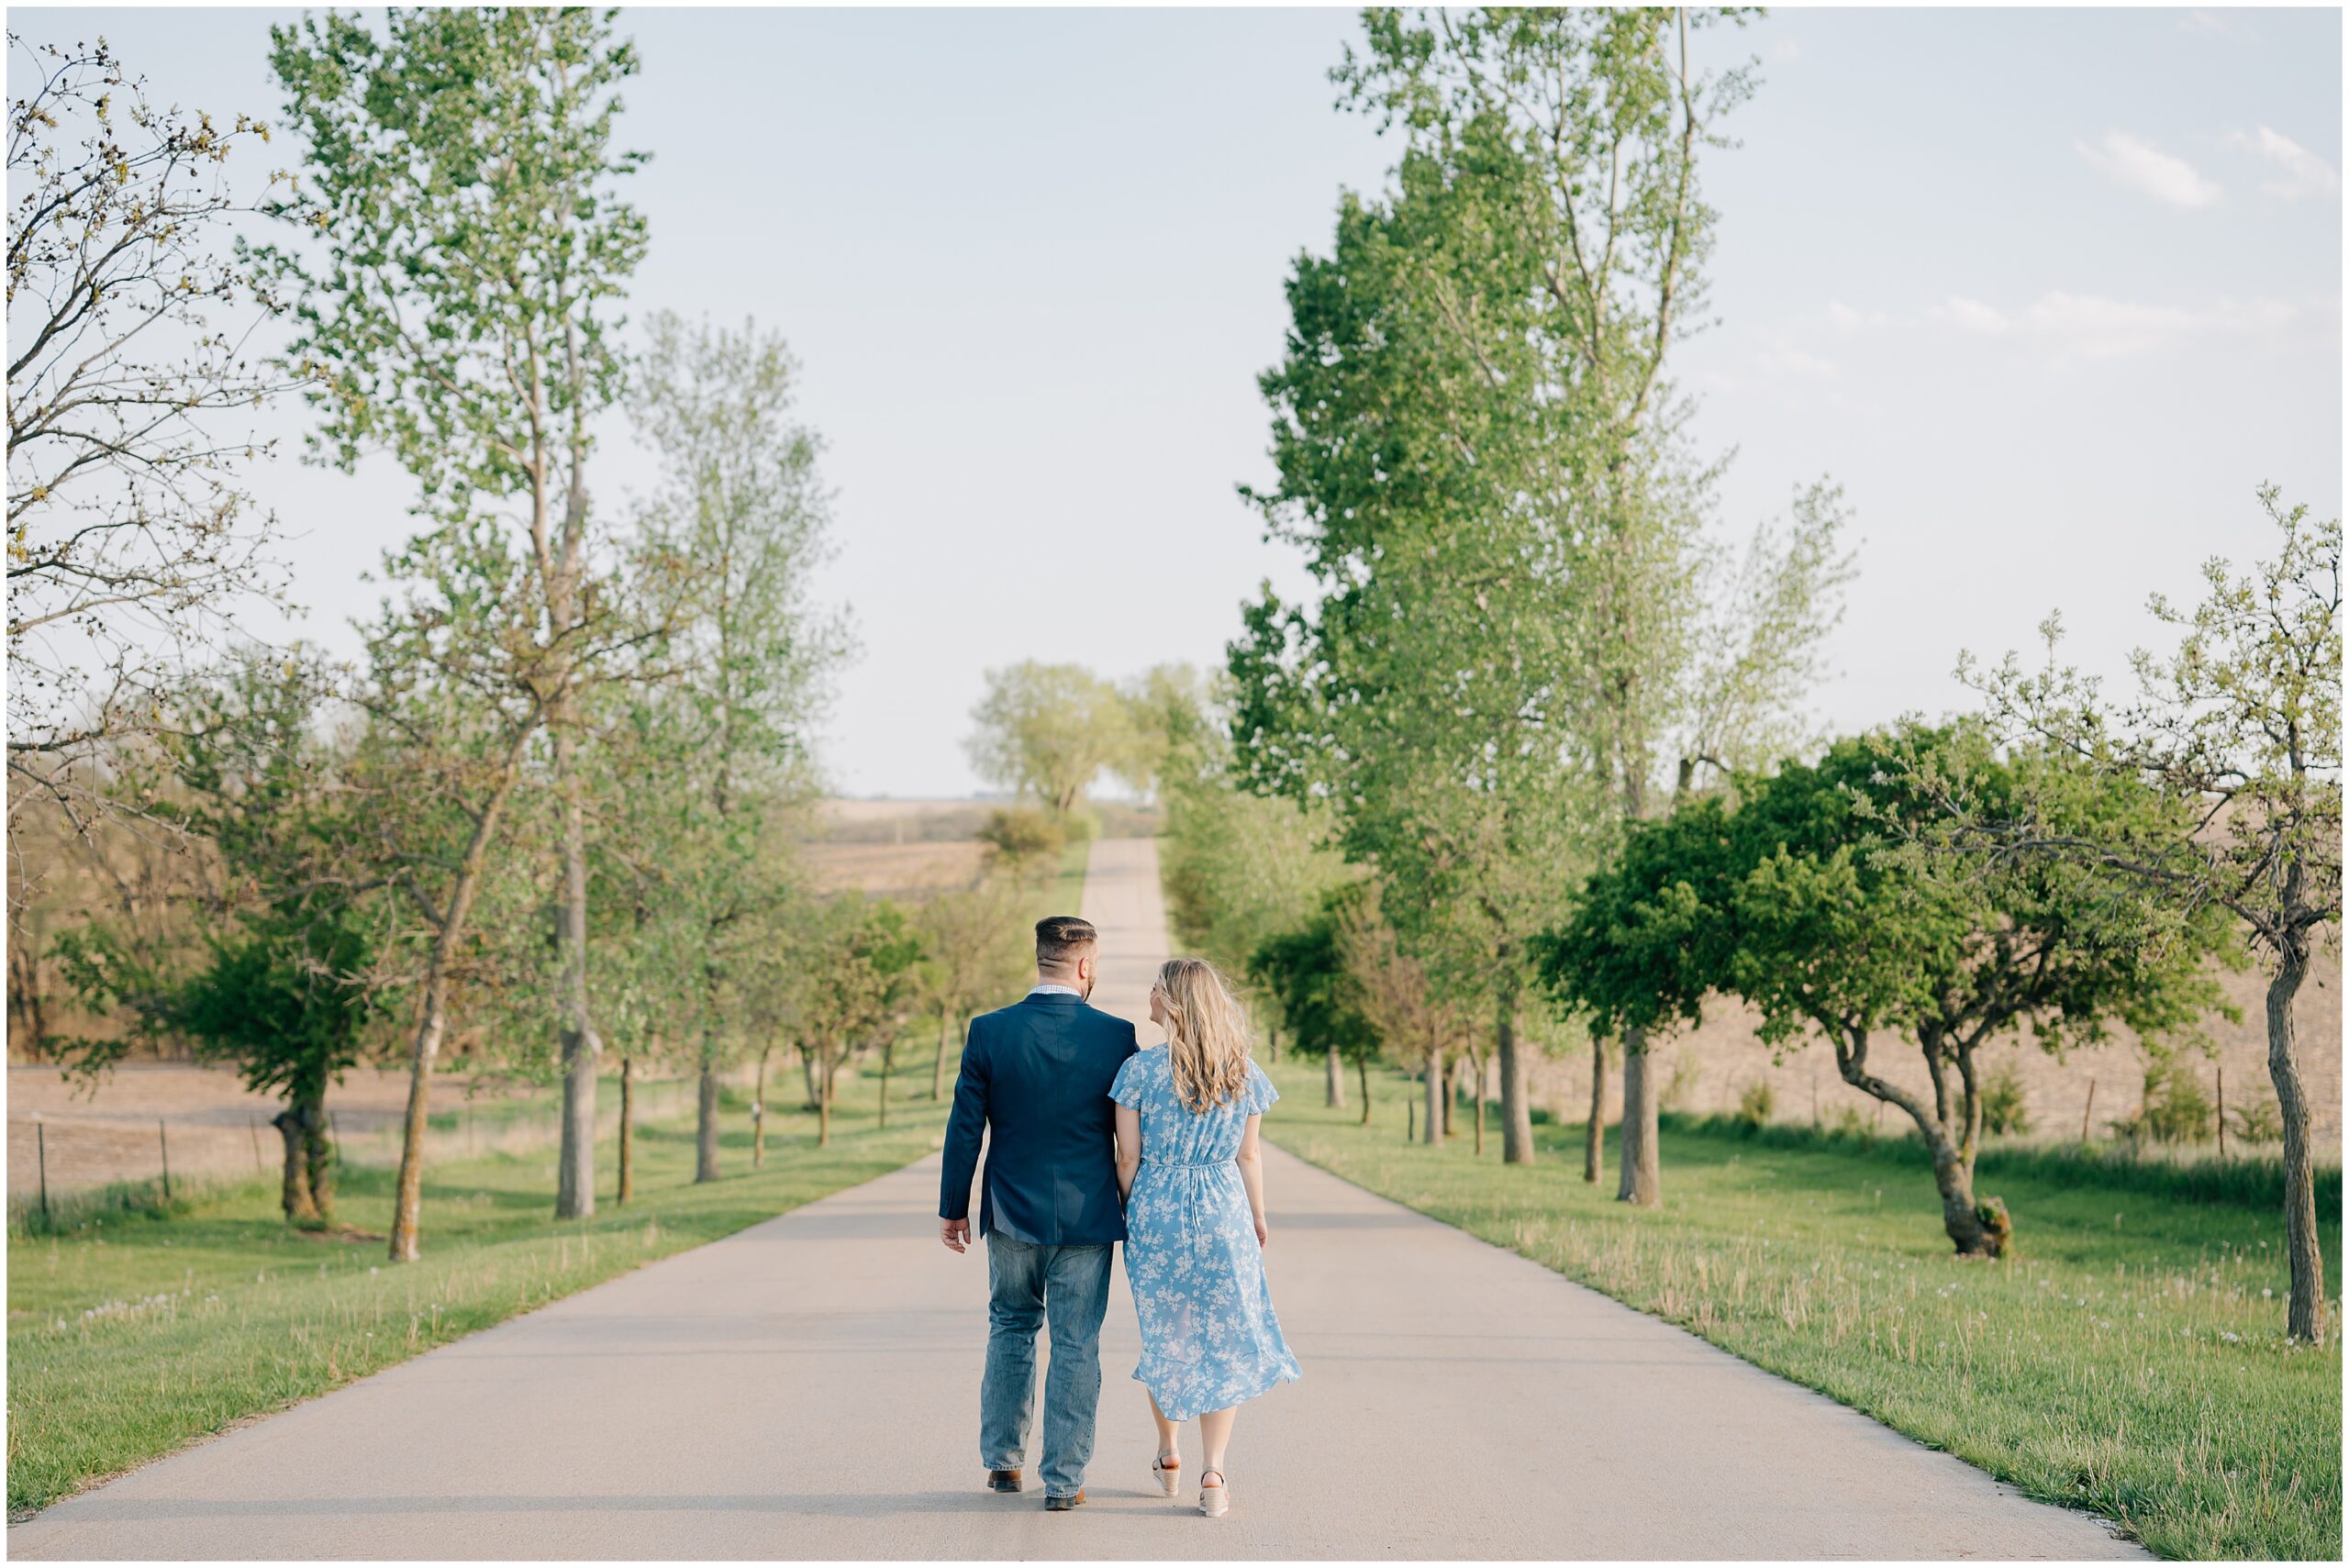 Girl wearing a blue floral dress and guy wearing a blue suit jacket and jeans walk down a road lined with trees. Photo by Omaha ne wedding photographer, Anna Brace.